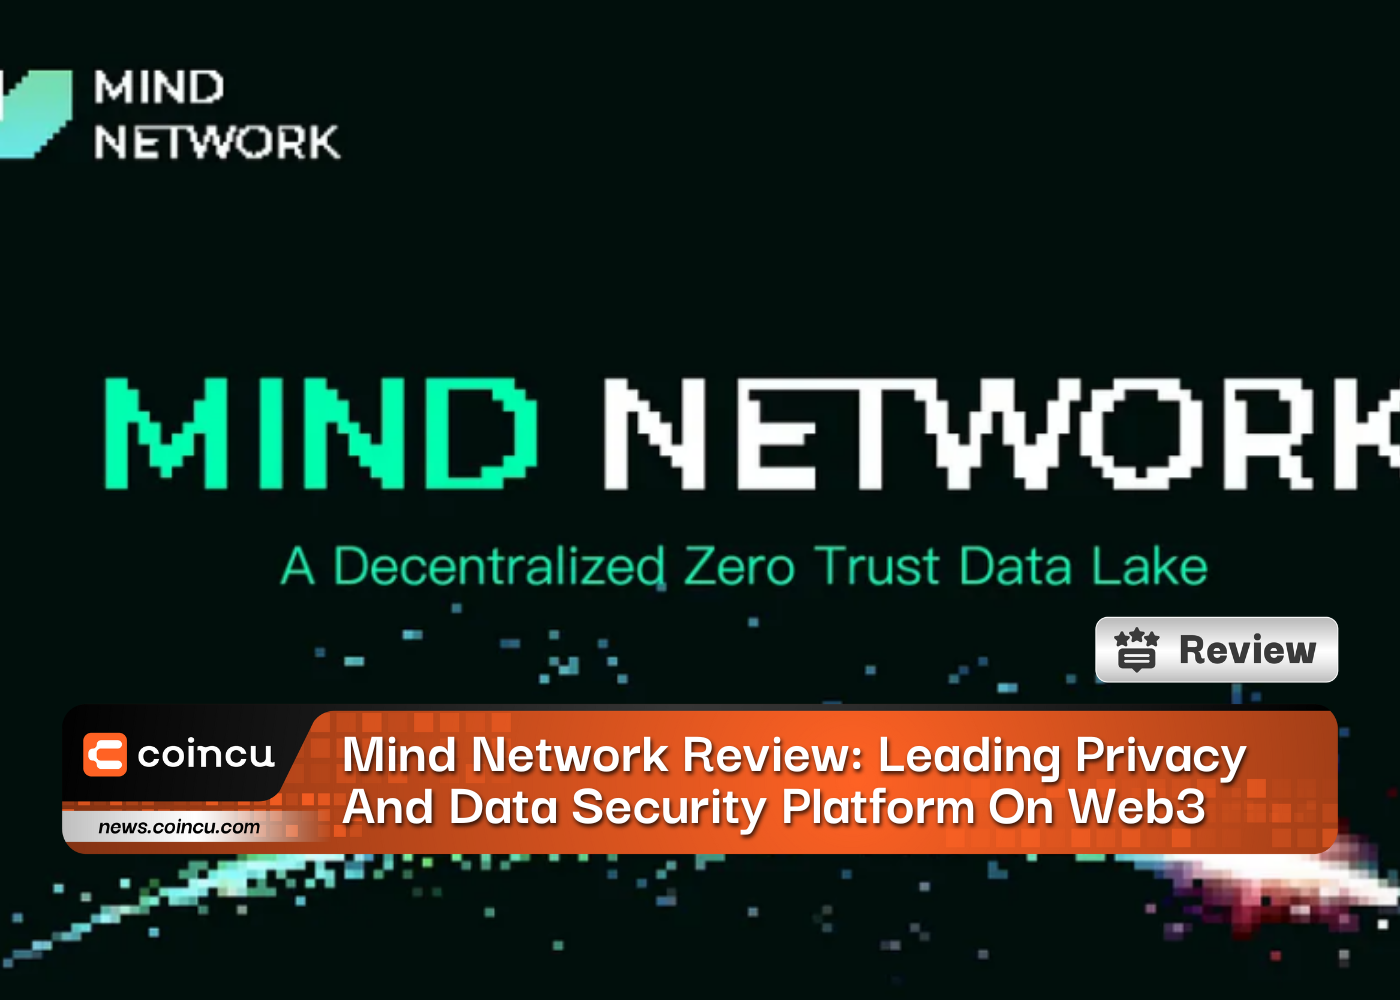 Mind Network Review: Leading Privacy And Data Security Platform On Web3